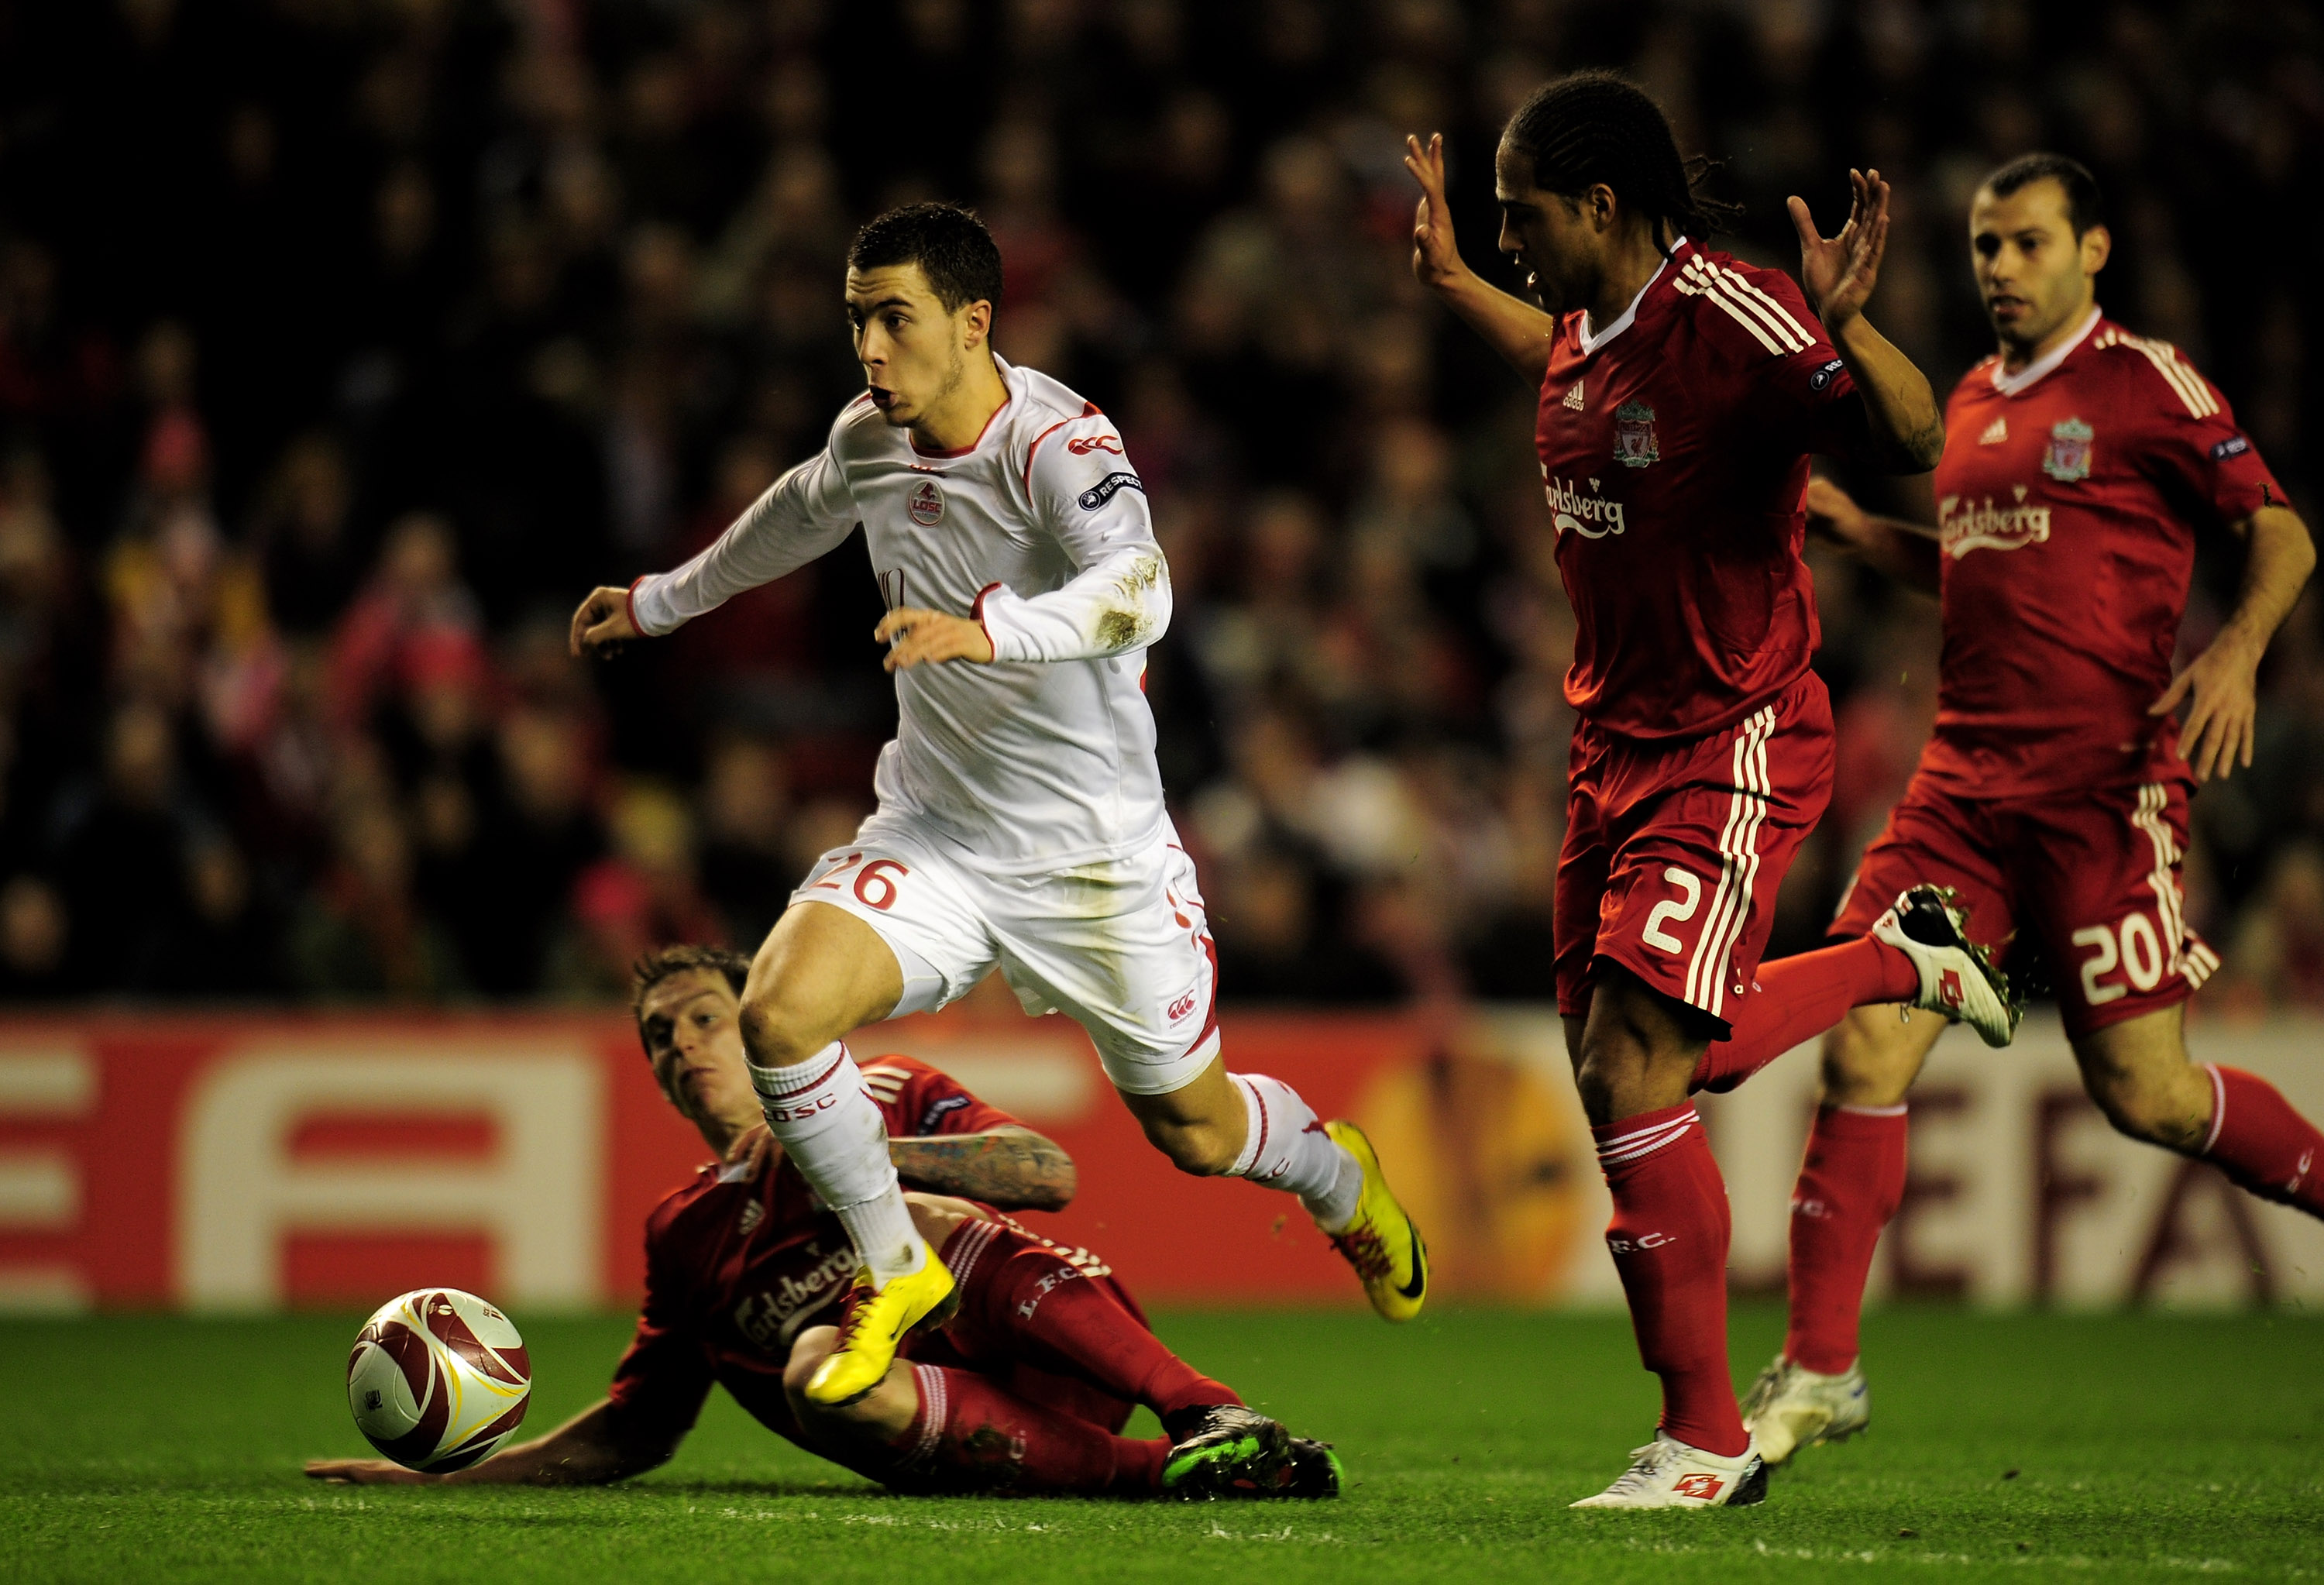 LIVERPOOL, ENGLAND - MARCH 18:  Eden Hazard of Lille breaks clear of the challenges of Daniel Agger and Glen Johnson (R) of Liverpool during the UEFA Europa League Round of 16, second leg match at Anfield on March 18, 2010 in Liverpool, England.  (Photo b